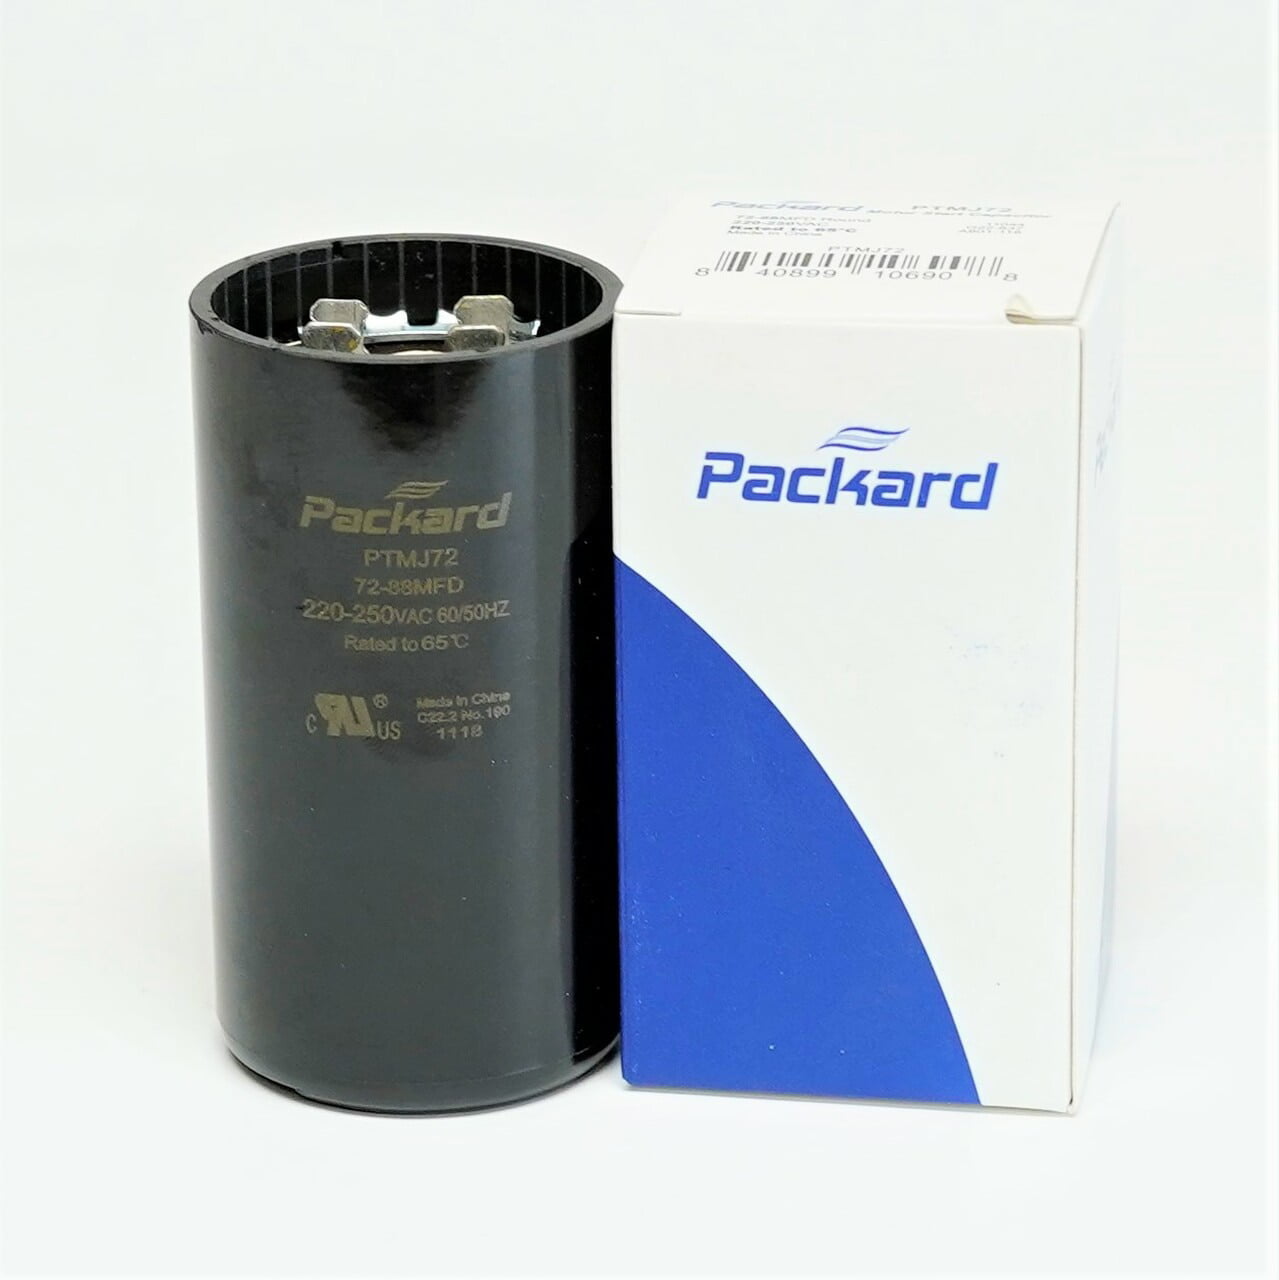 Packard PTMJ72 Motor Start Capacitor 72-88 MFD 220-250 VAC for sale online 